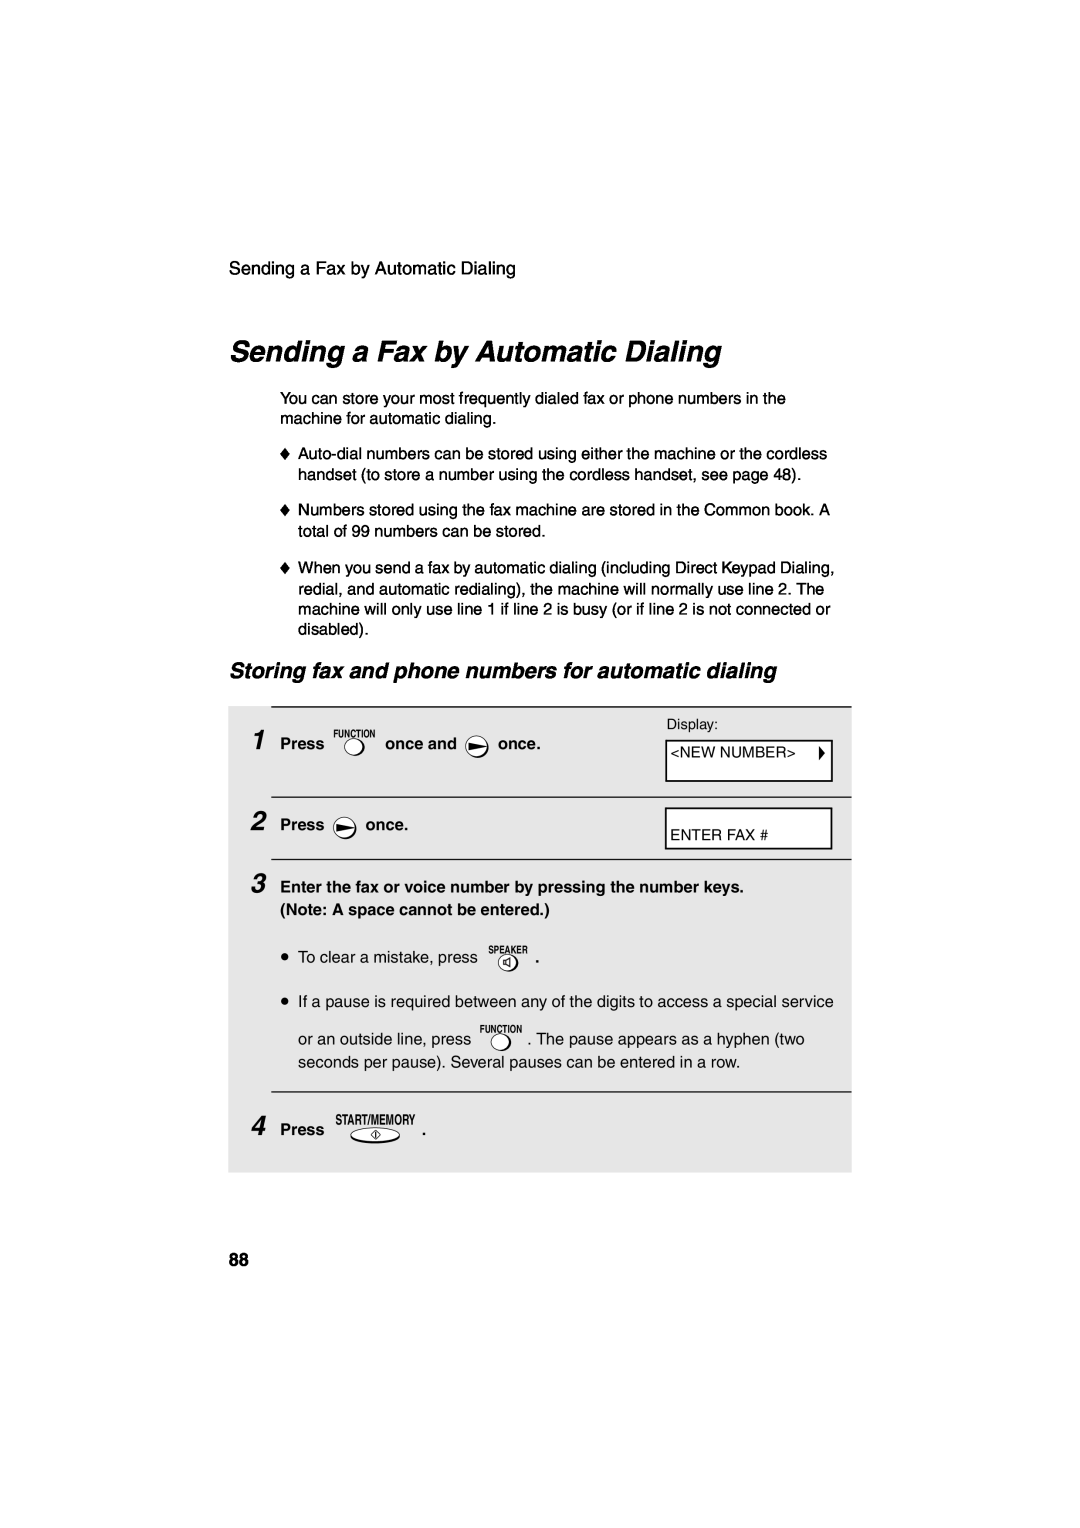 Sharp UX-CD600 operation manual Sending a Fax by Automatic Dialing, Storing fax and phone numbers for automatic dialing 